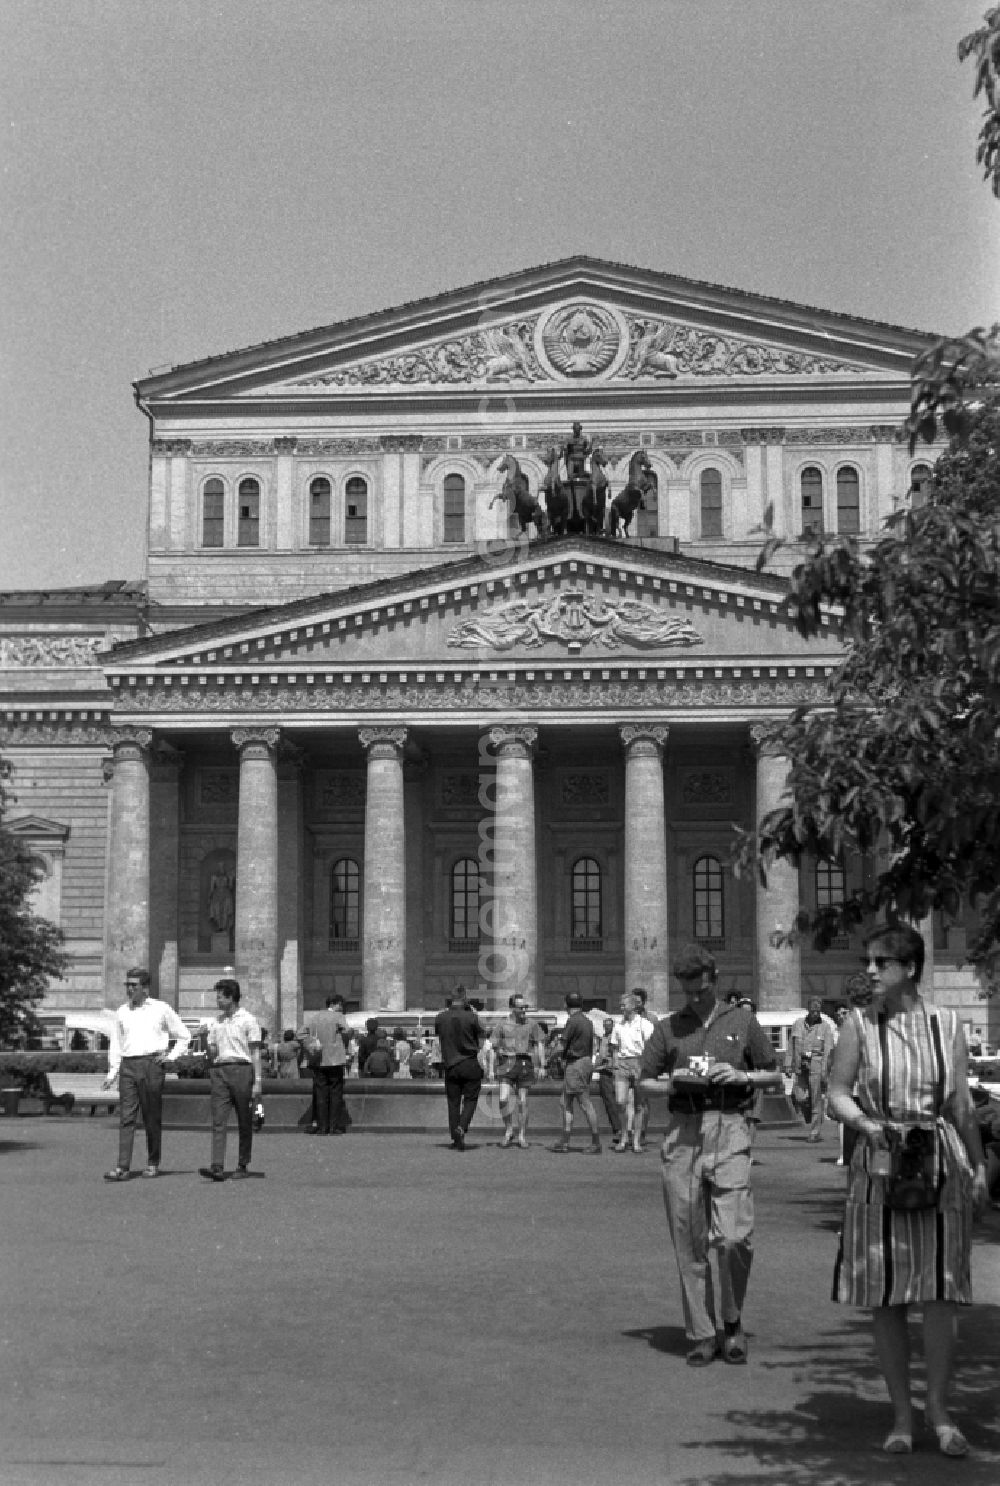 GDR image archive: Moskau - The Bolshoi Theater in Moscow. It is the best known and most important theater of Opera and Ballet in Russia. In the times of the Soviet Union met here the party days of the CPSU